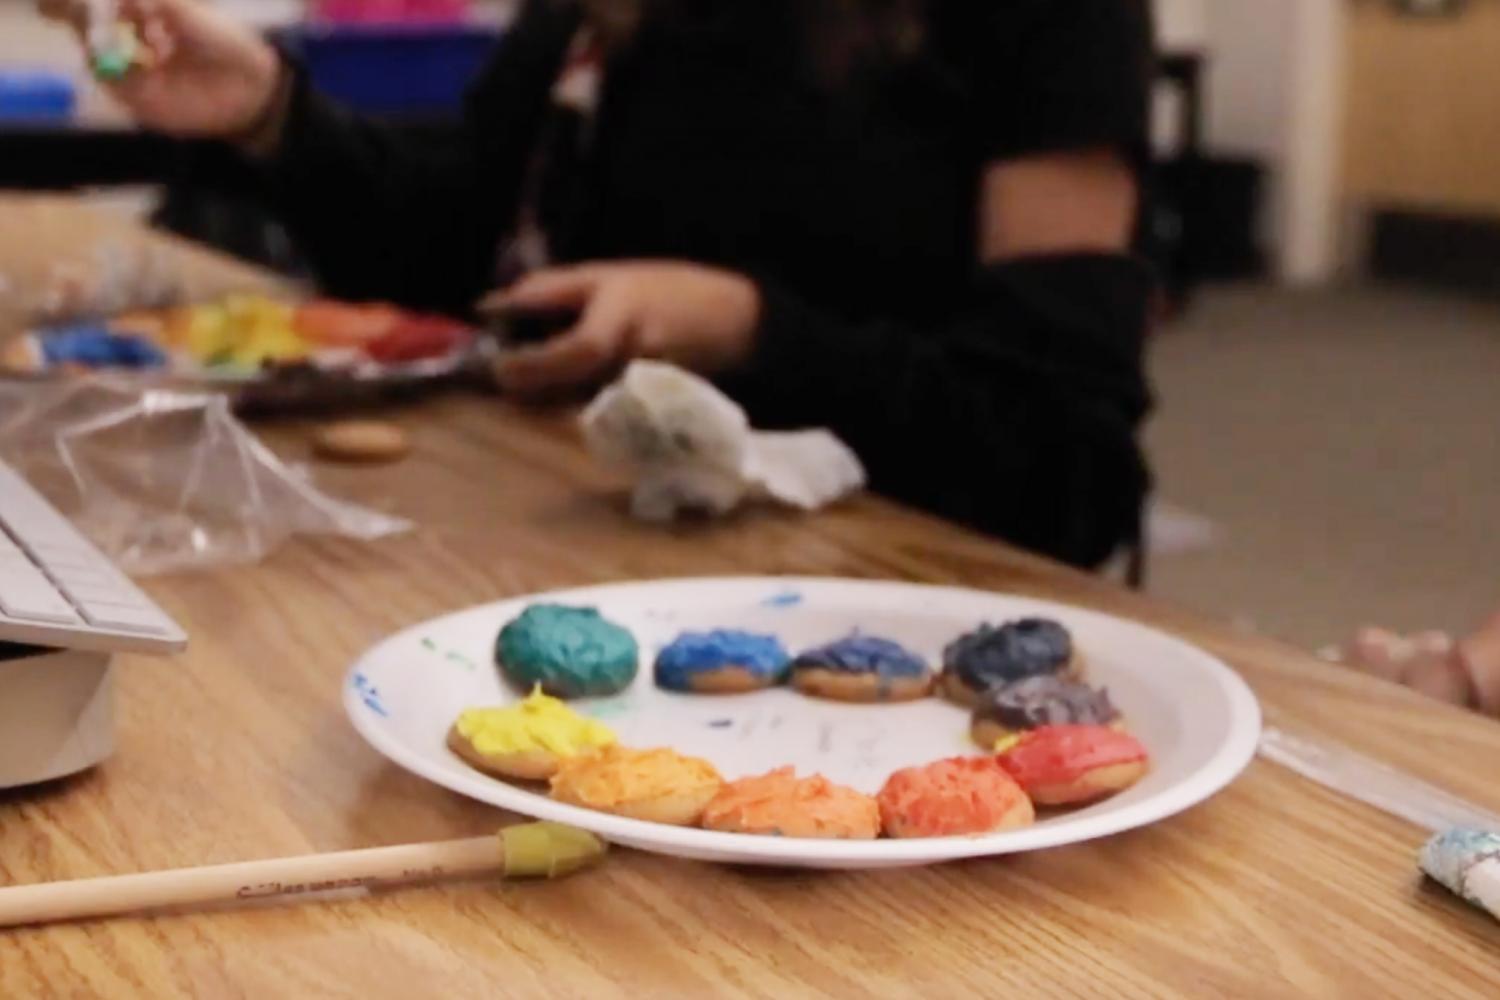 VIDEO: Fashion students create cookie color wheels